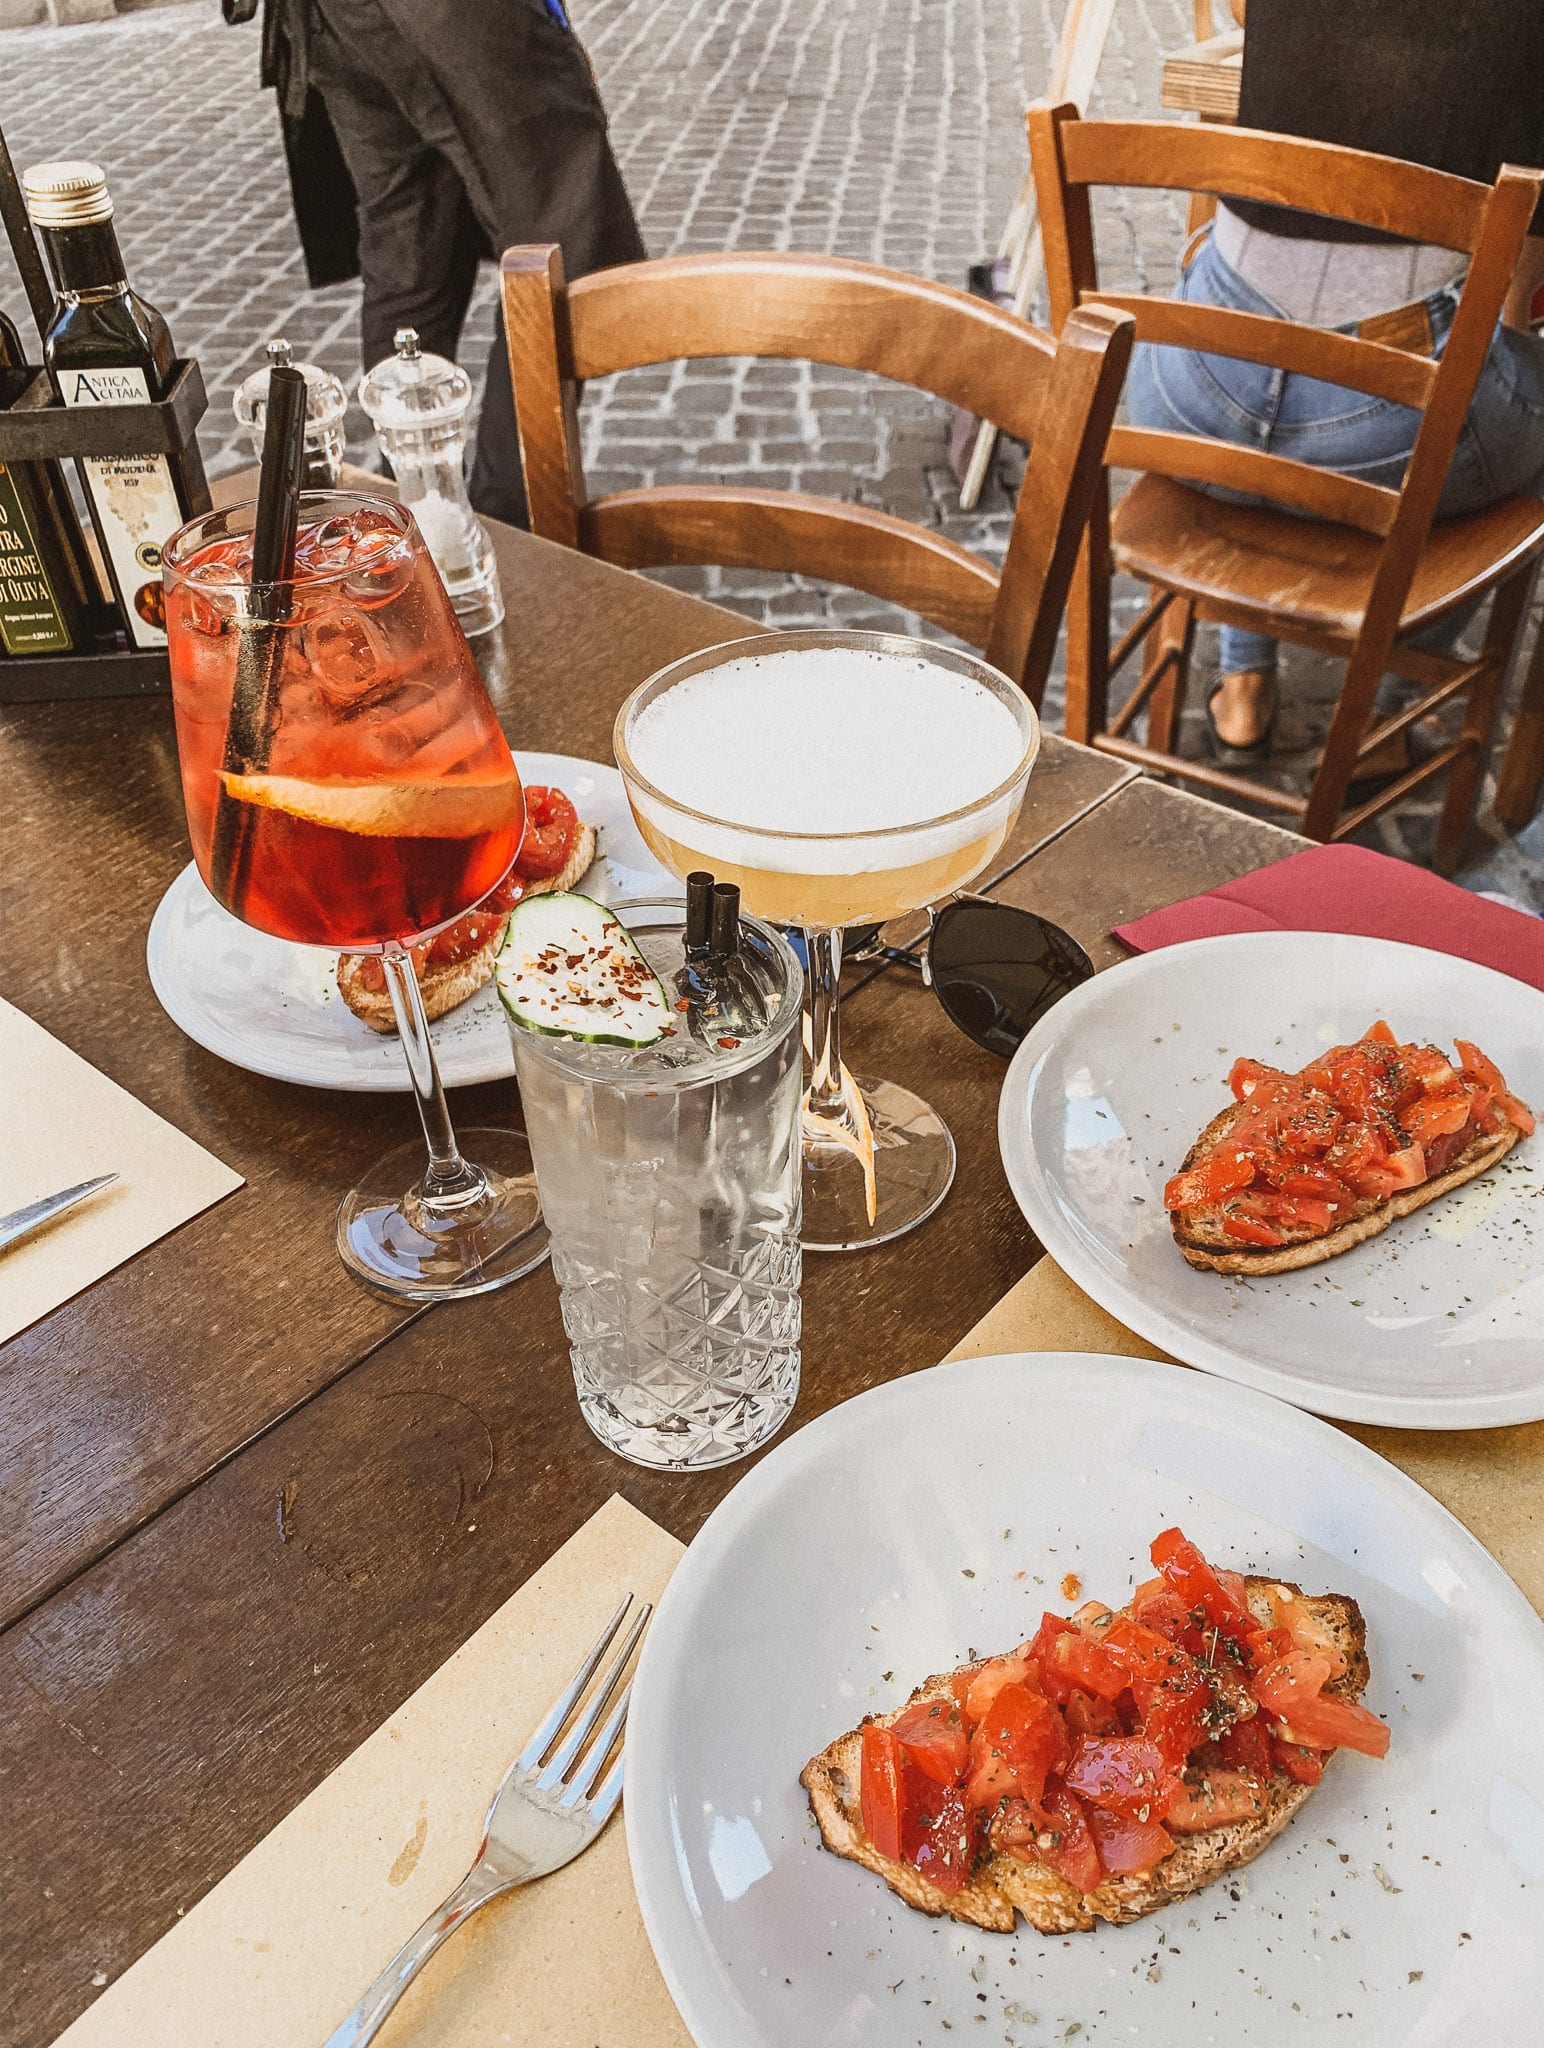 Aperitivo and dinner at Pasquino bistrot during sunset in Rome means good food, classic Italian drinks and watching the fashionable Italians hanging out in the summer nights